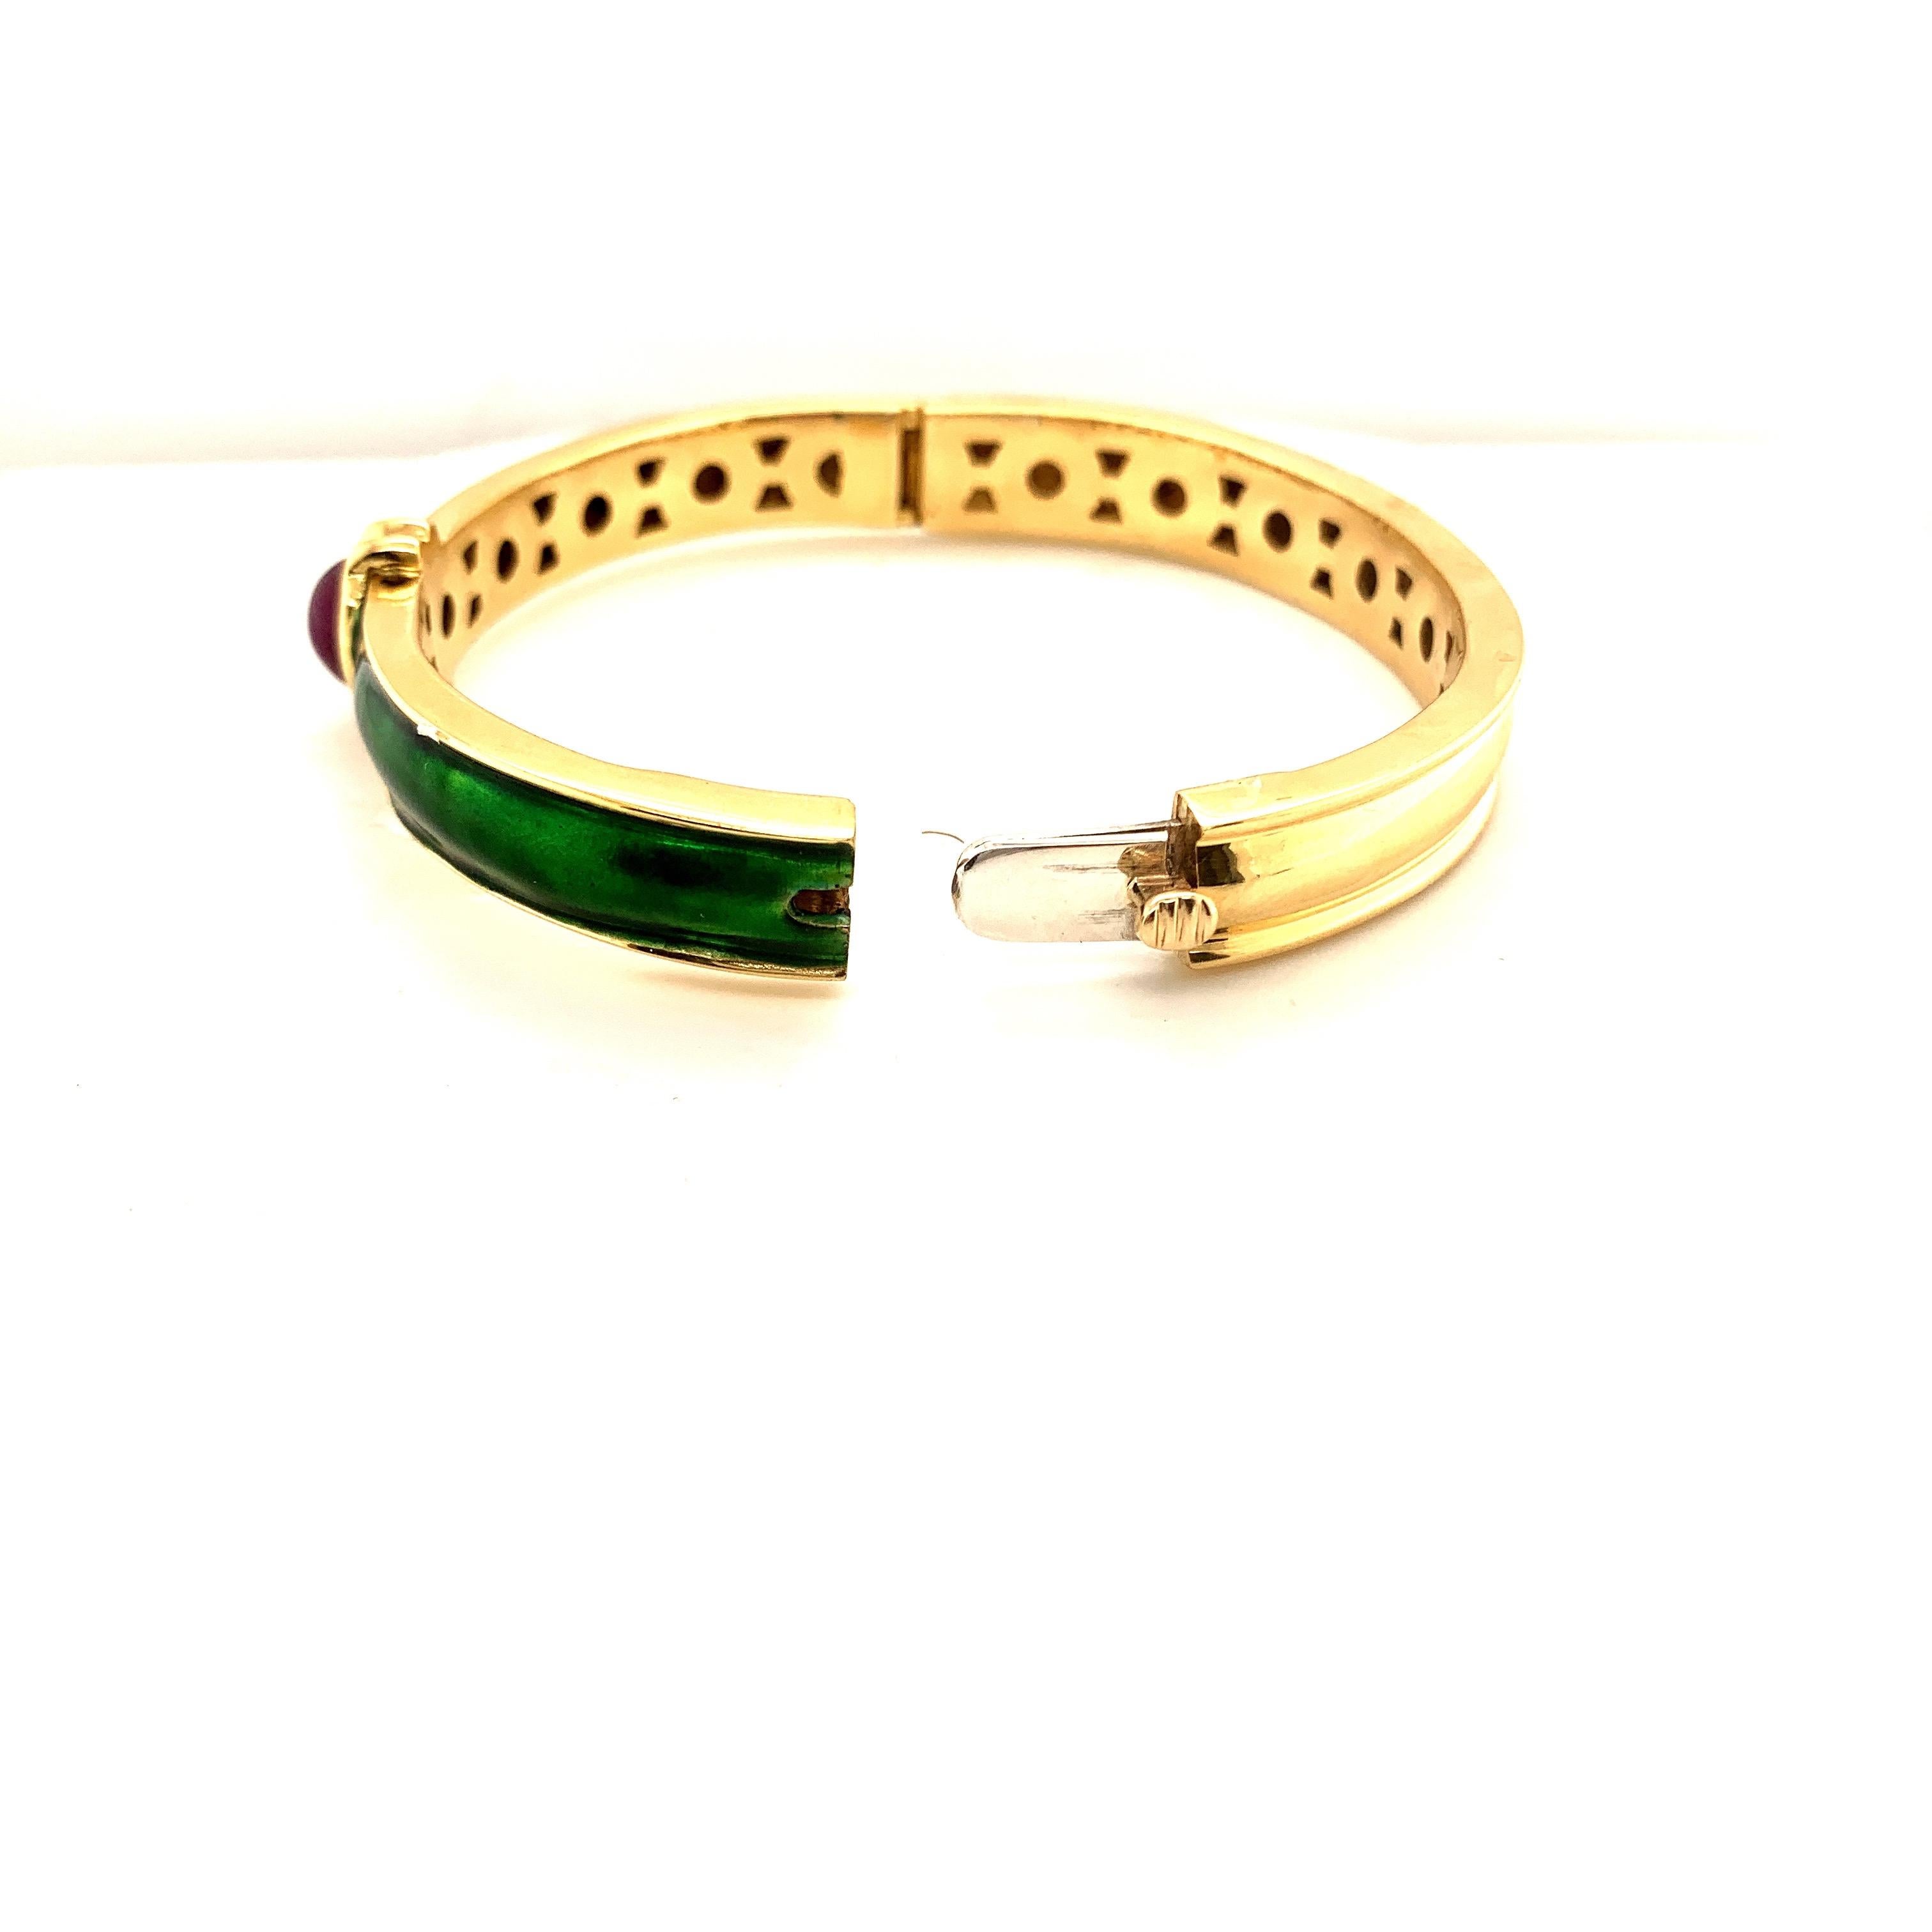 Pair of striking enamel bracelet bangles. one set with Cabochon Ruby and the other set with Cabochon Emerald. With Each bangle individually weighing 42 grams of 18k Gold, This pair of enamel bangles are unique and pretty.
A great addition to any